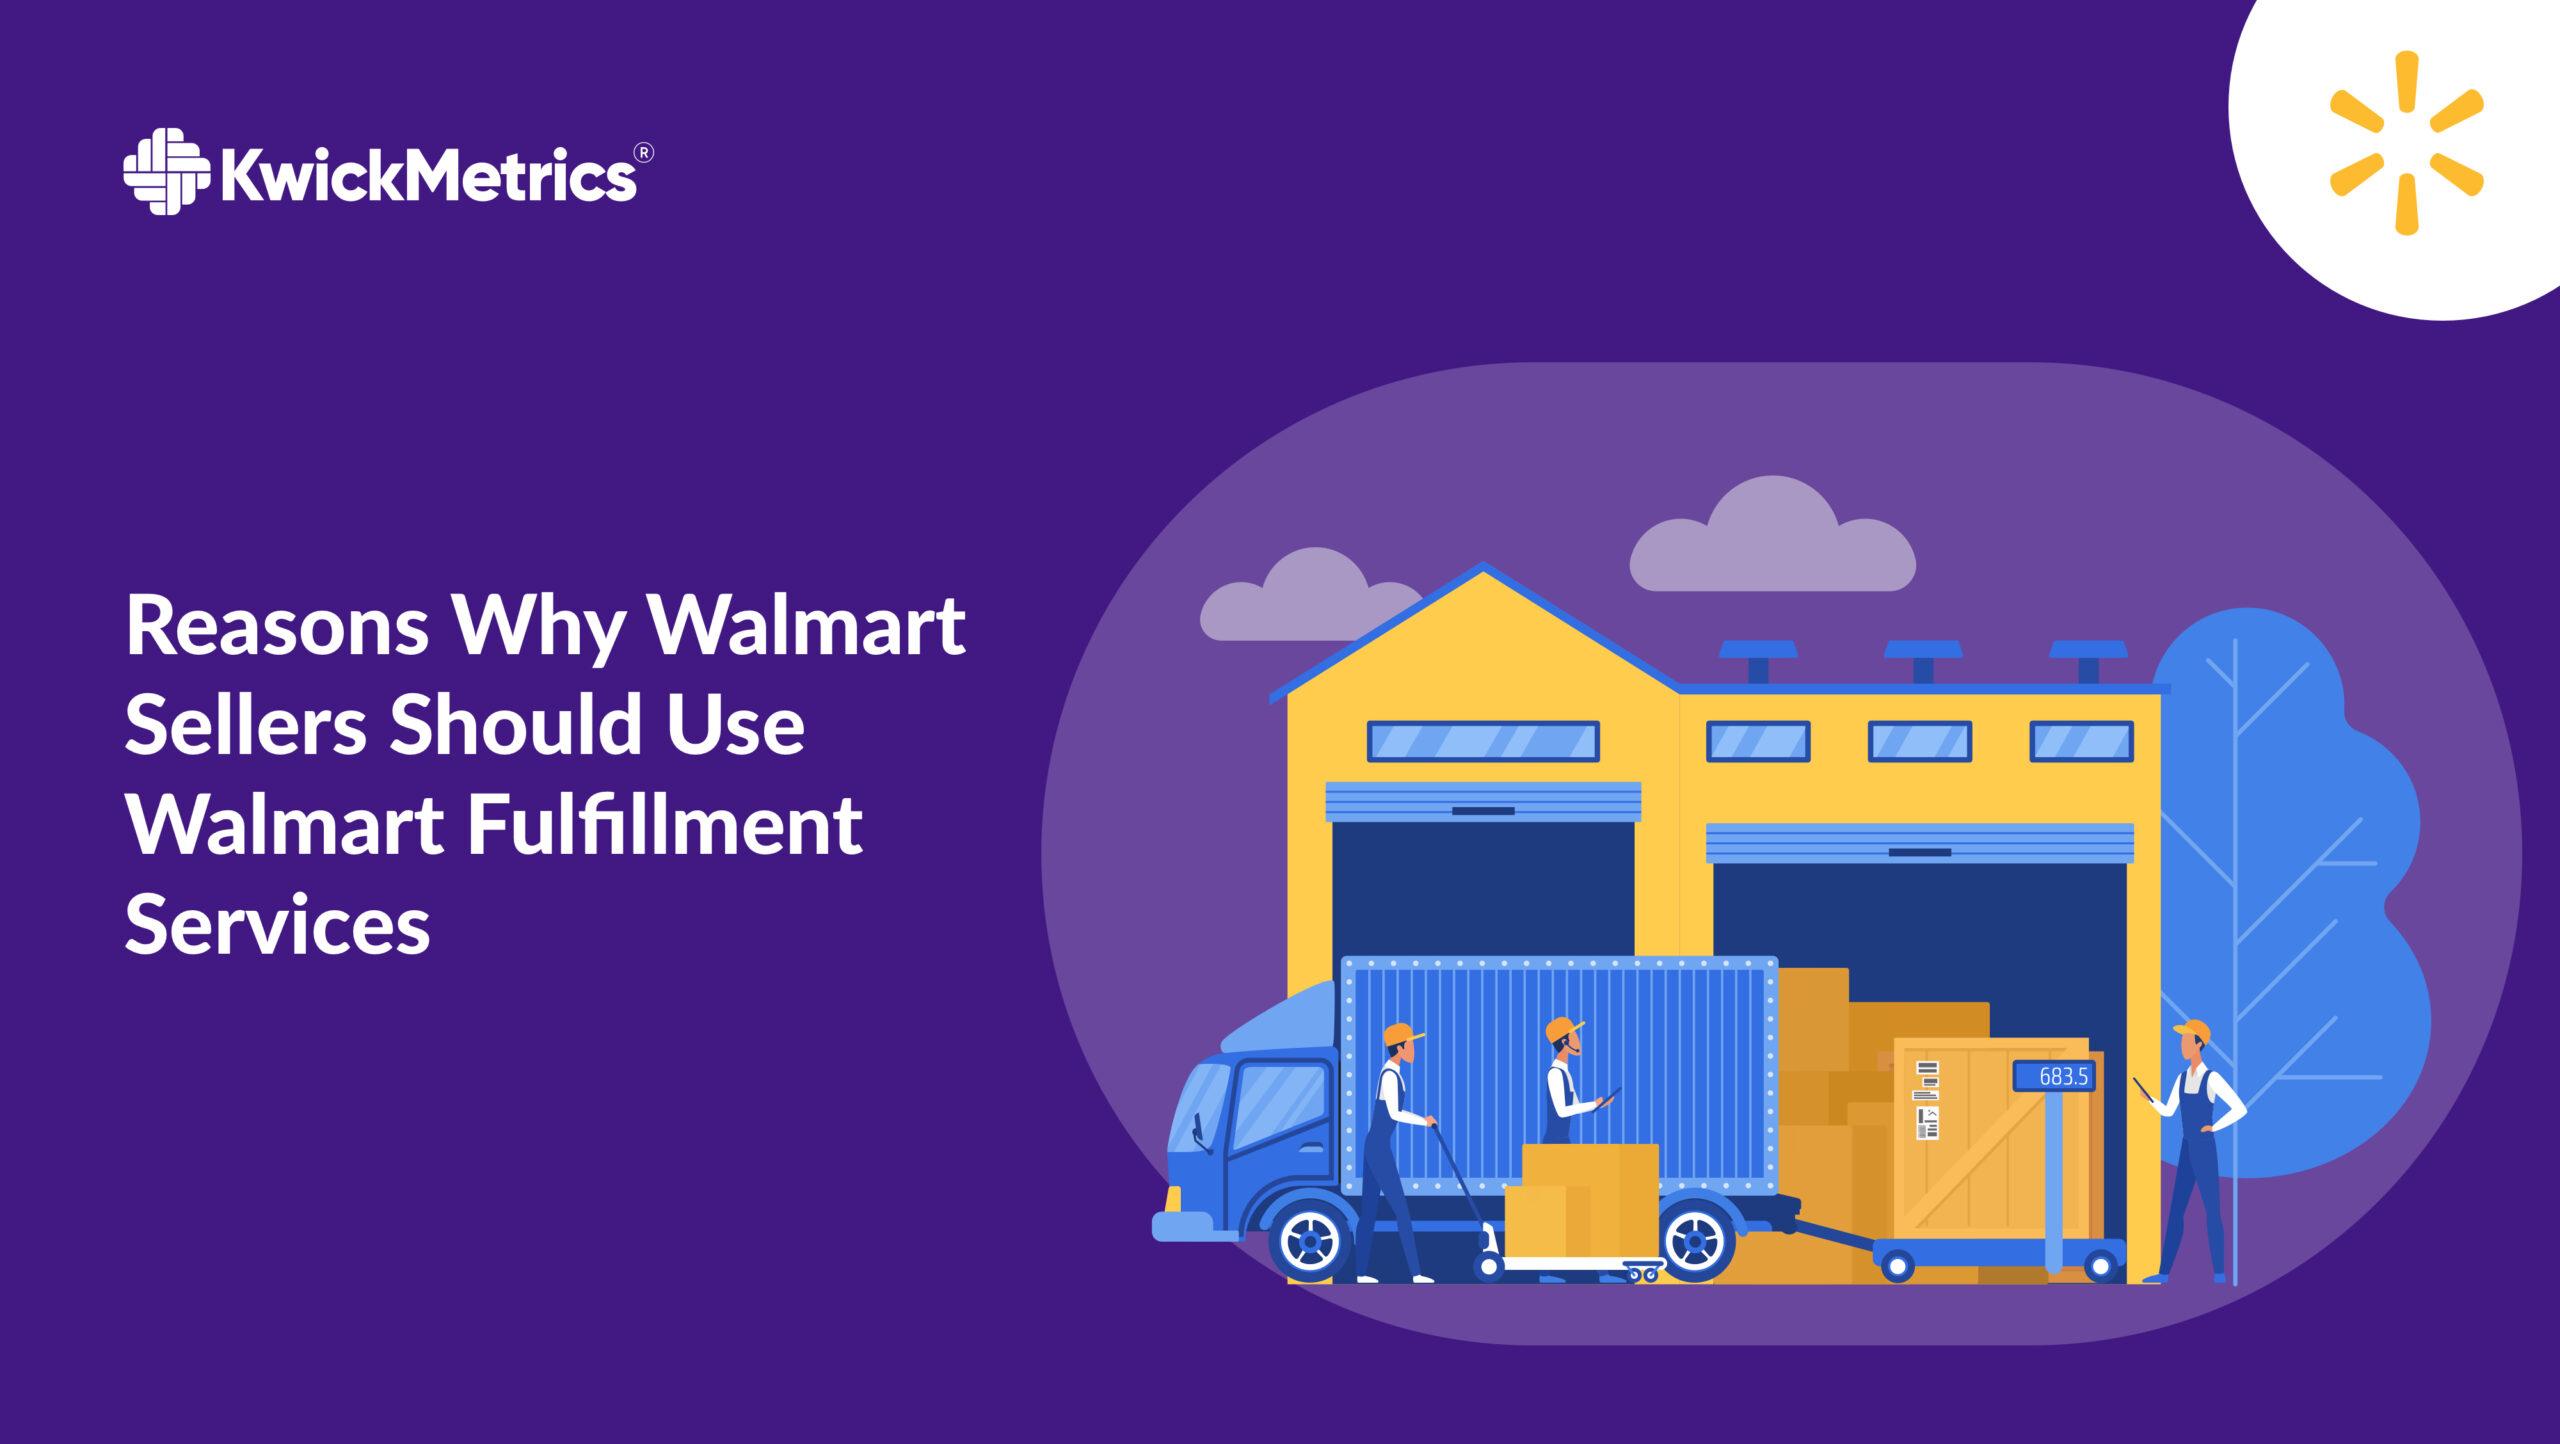 Reasons Why Walmart Sellers Should Use Walmart Fulfillment Services